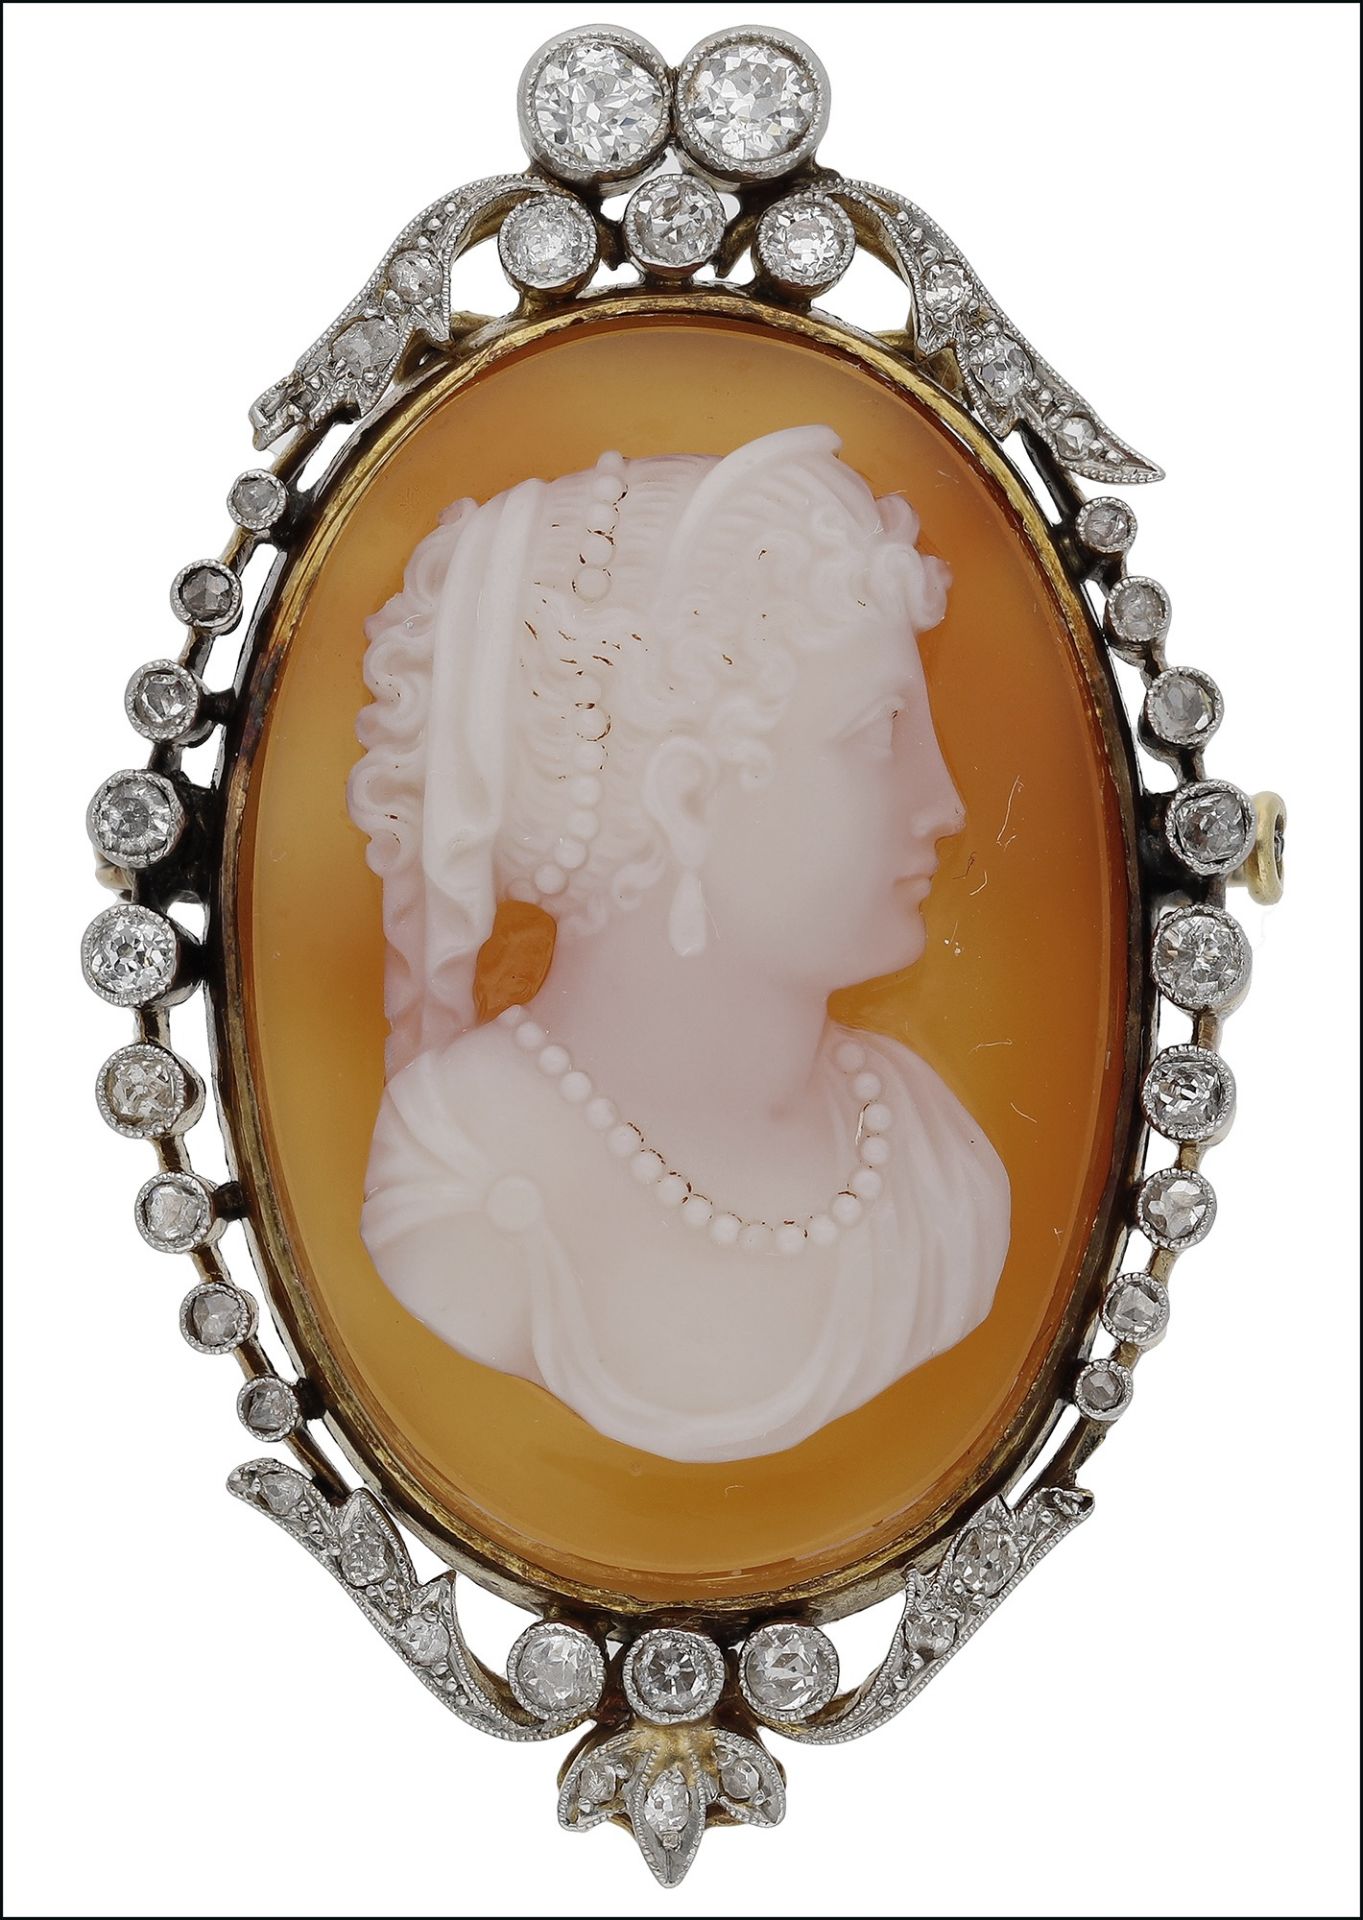 A late 19th century/early 20th century hardstone cameo and diamond brooch, carved to depict...